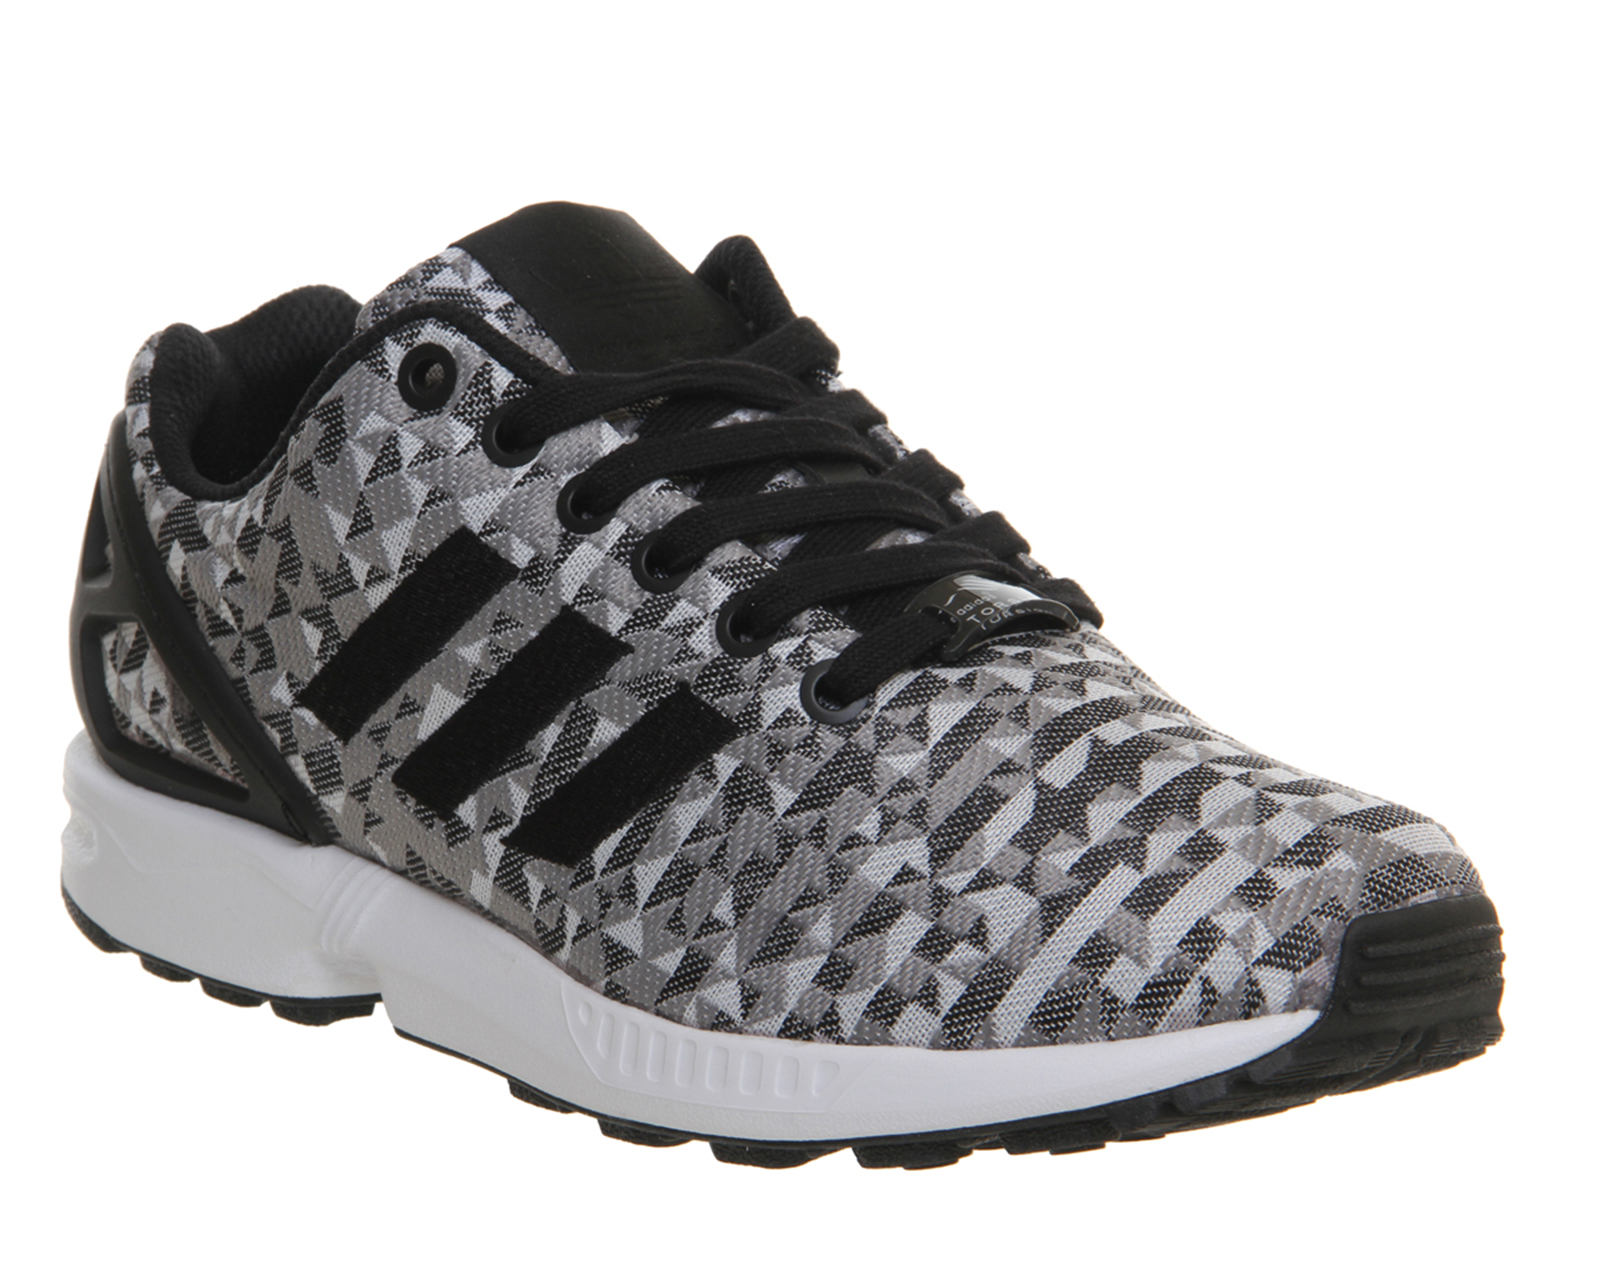 Adidas Zx Flux Black White Online Sale, UP TO 67% OFF